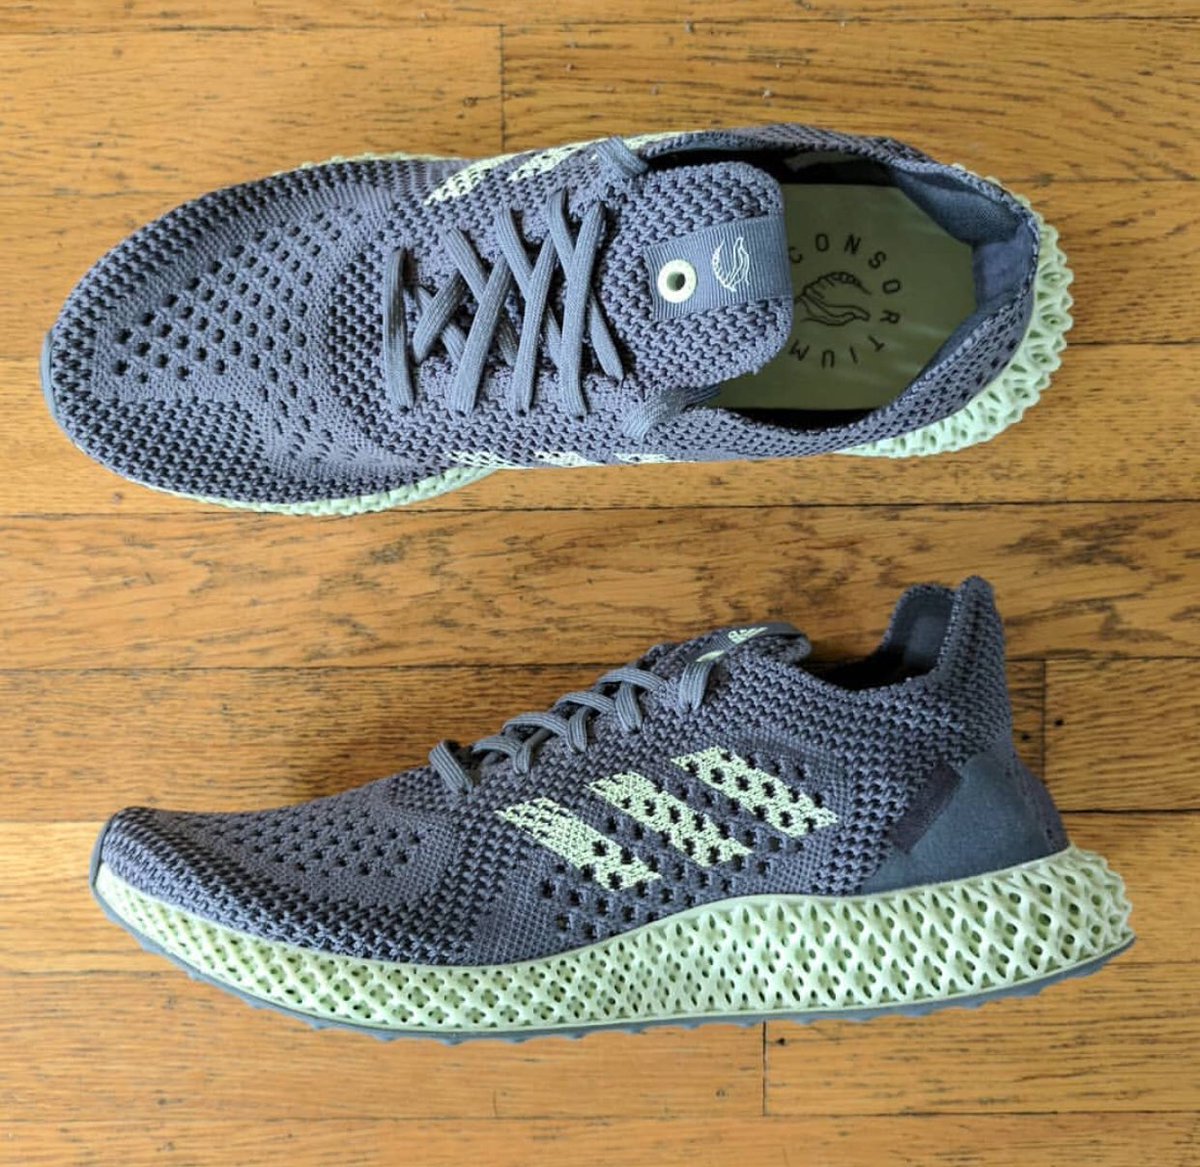 adidas futurecraft 4d friends and family